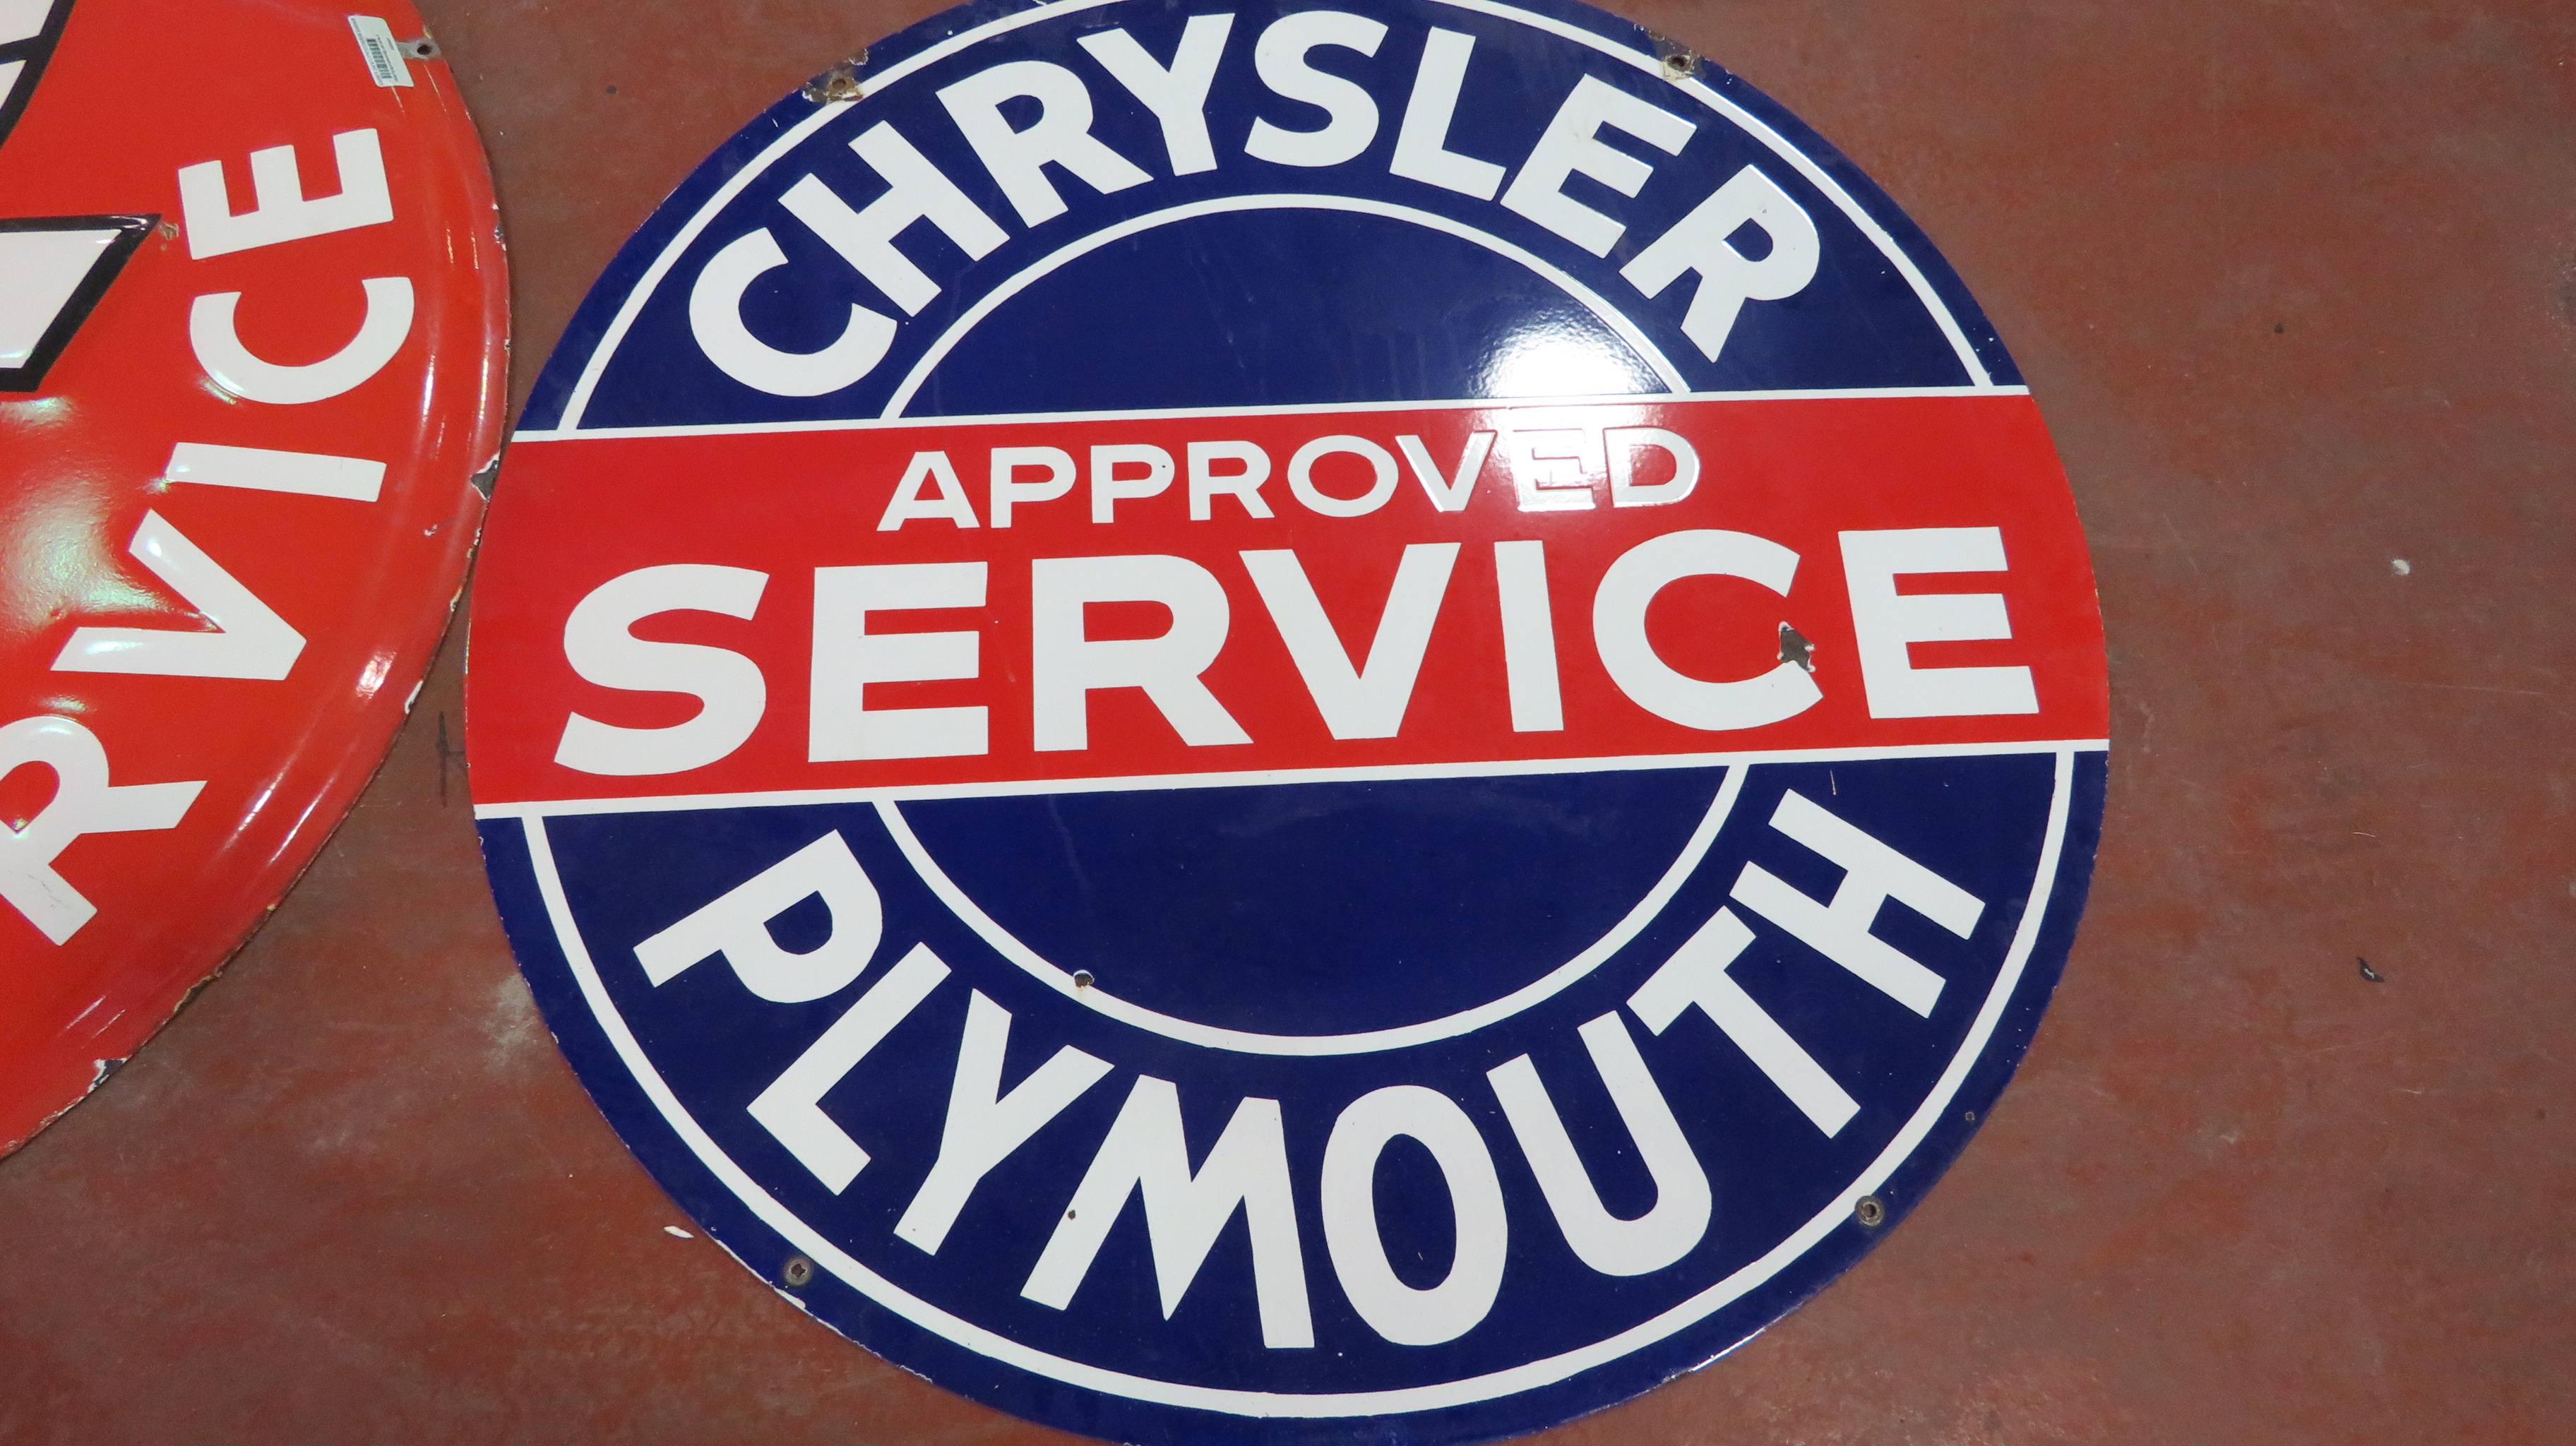 0th Image of a N/A CHRYSLER PLYMOUTH APPROVED SERVICE